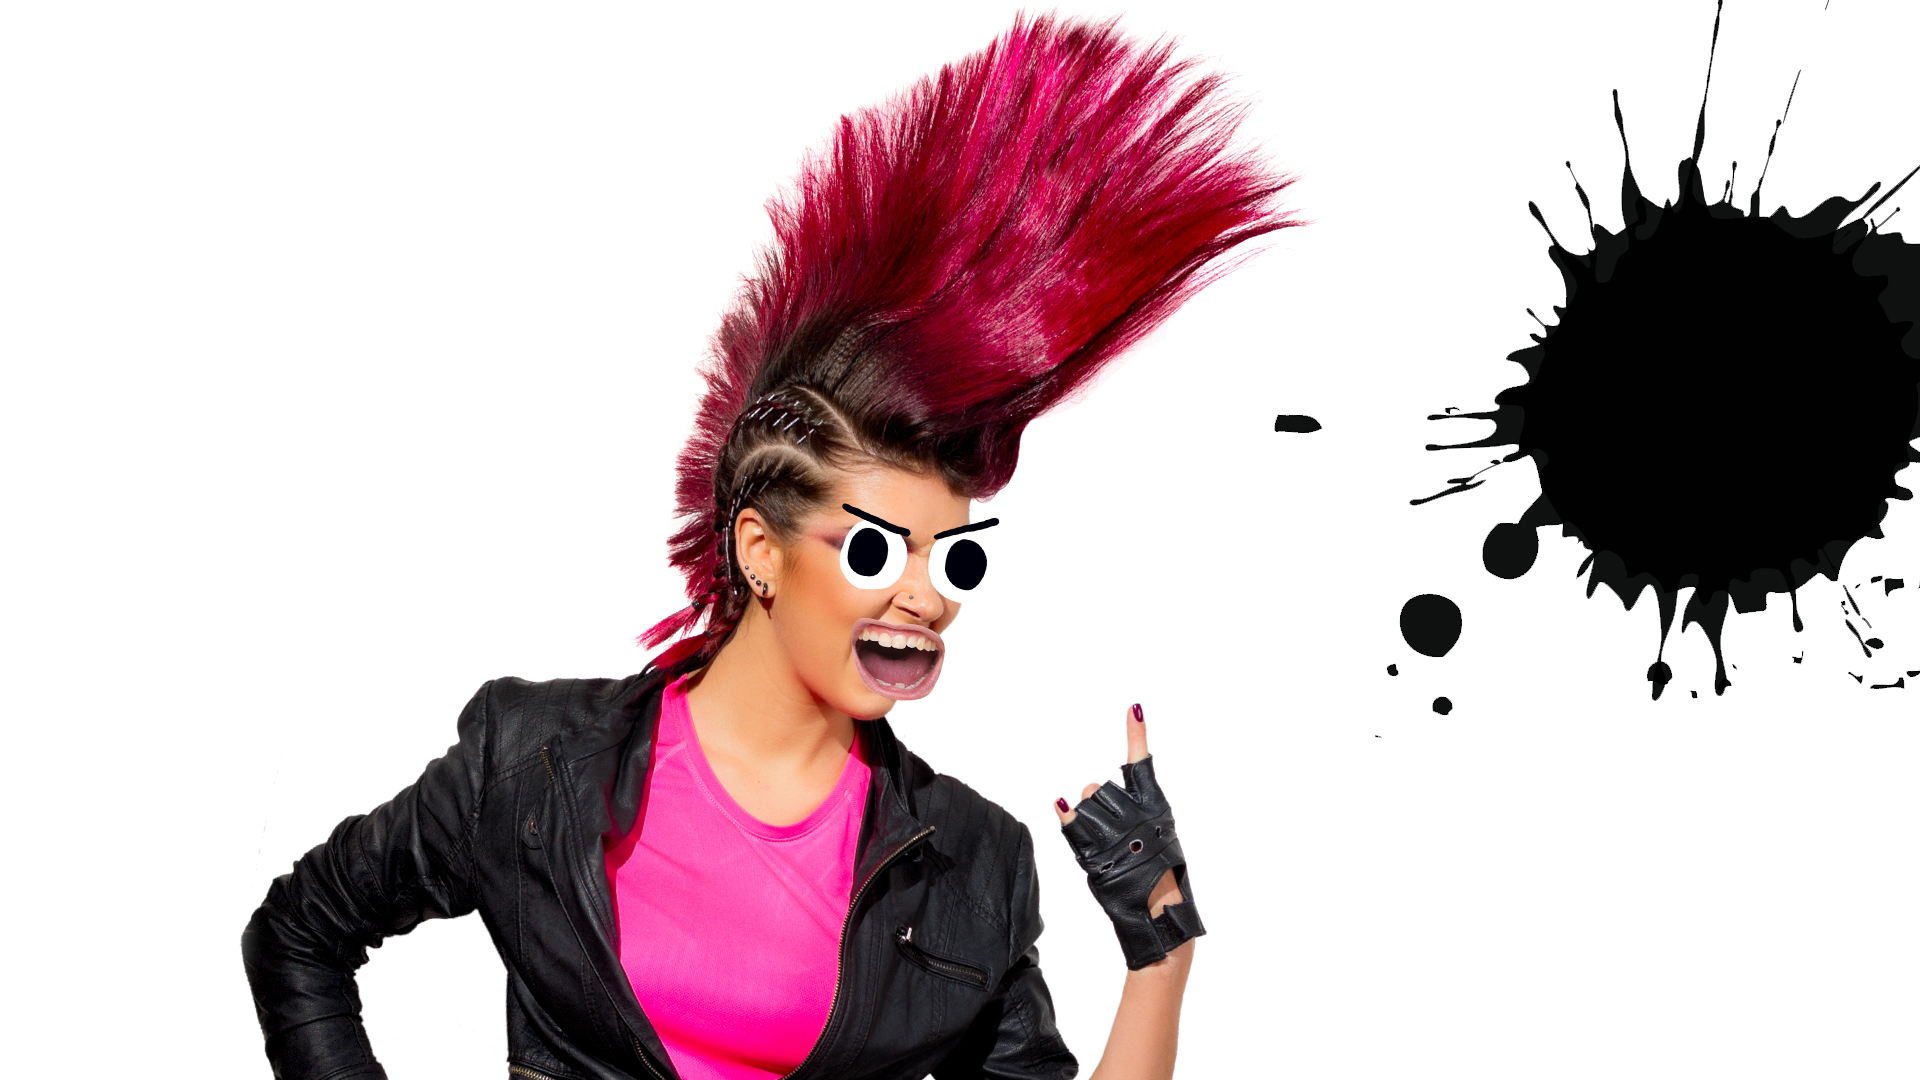 A punk with amazing hair